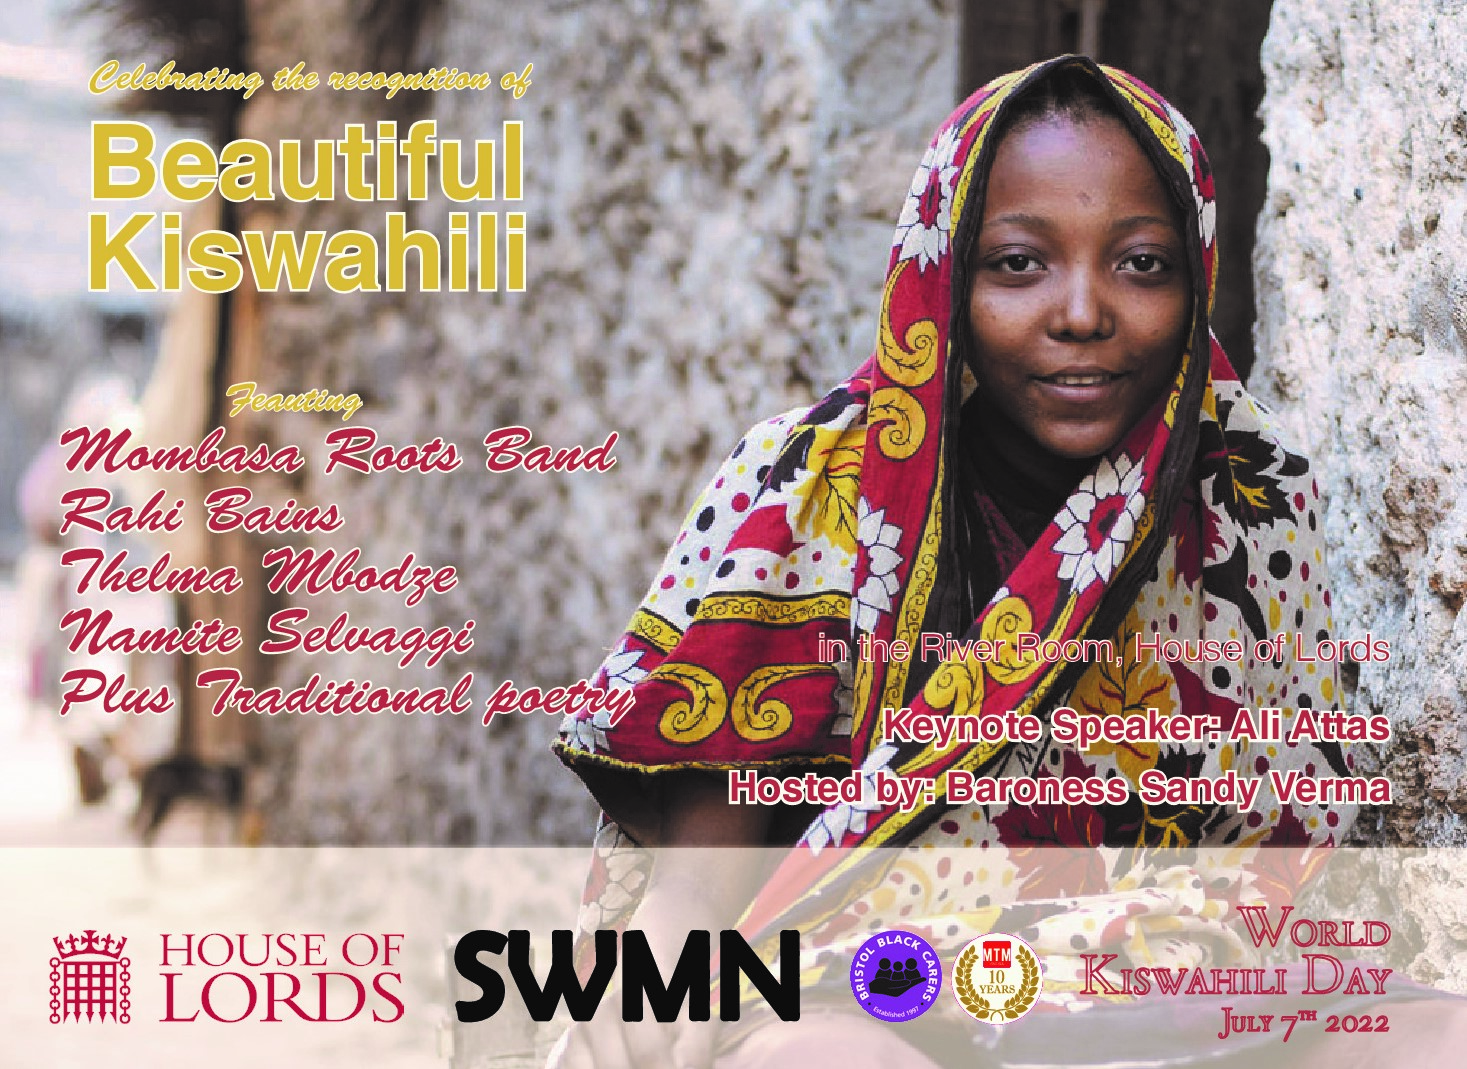 1st World Kiswahili Day Evening by MTM and Bristol Black Carers at the River Room House of Lords with the Kind Permission of the Lord Speaker hosted by Baroness Sanday Verma facilitated by the Lord Sheikh(Late)-July 7th 2022.